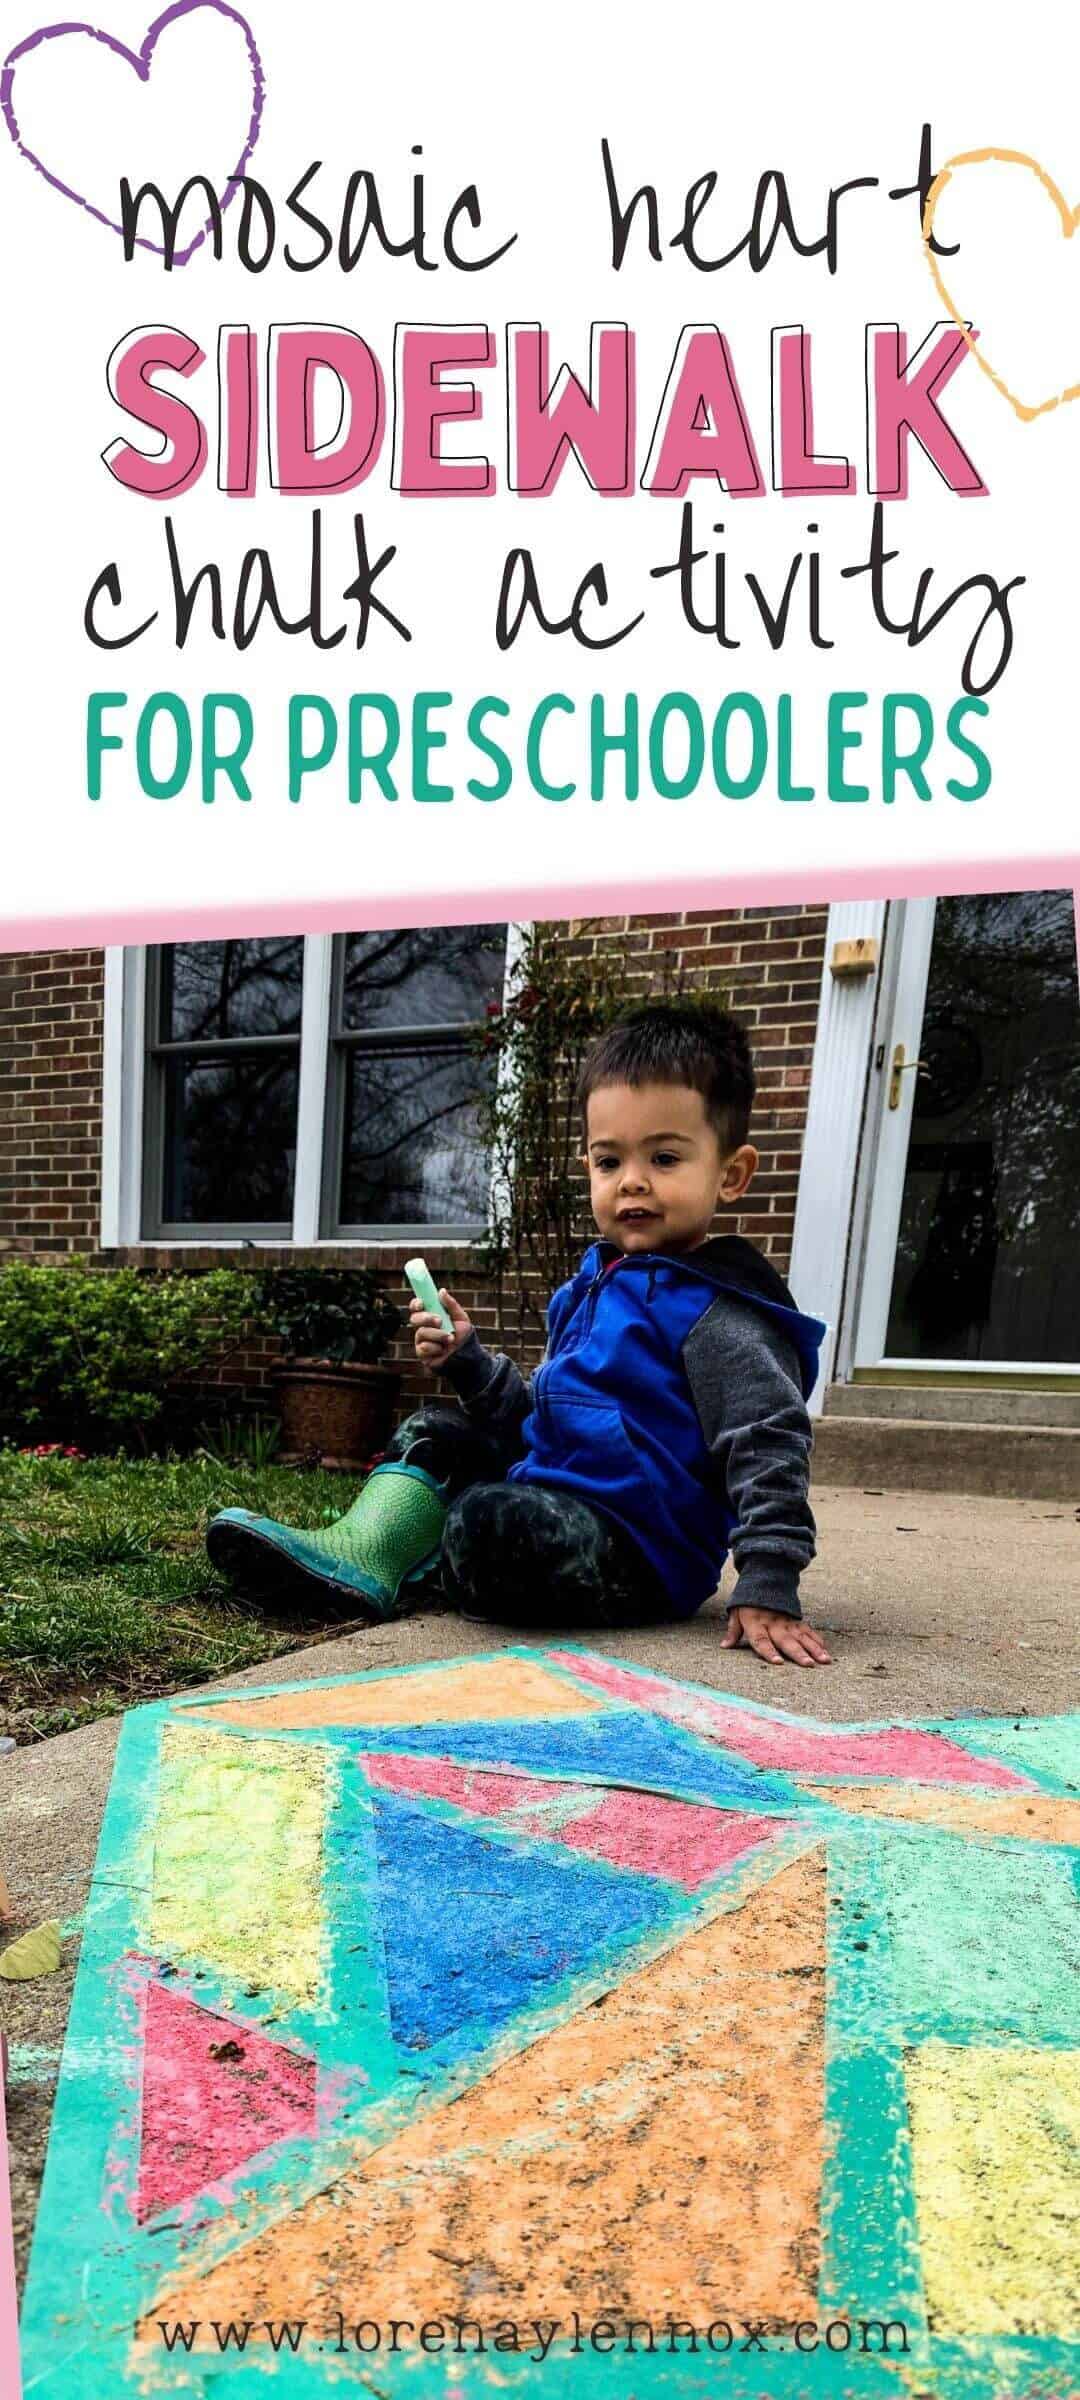 Mosaic Heart Sidewalk Chalk Outdoor Activity for Toddlers and Preschoolers